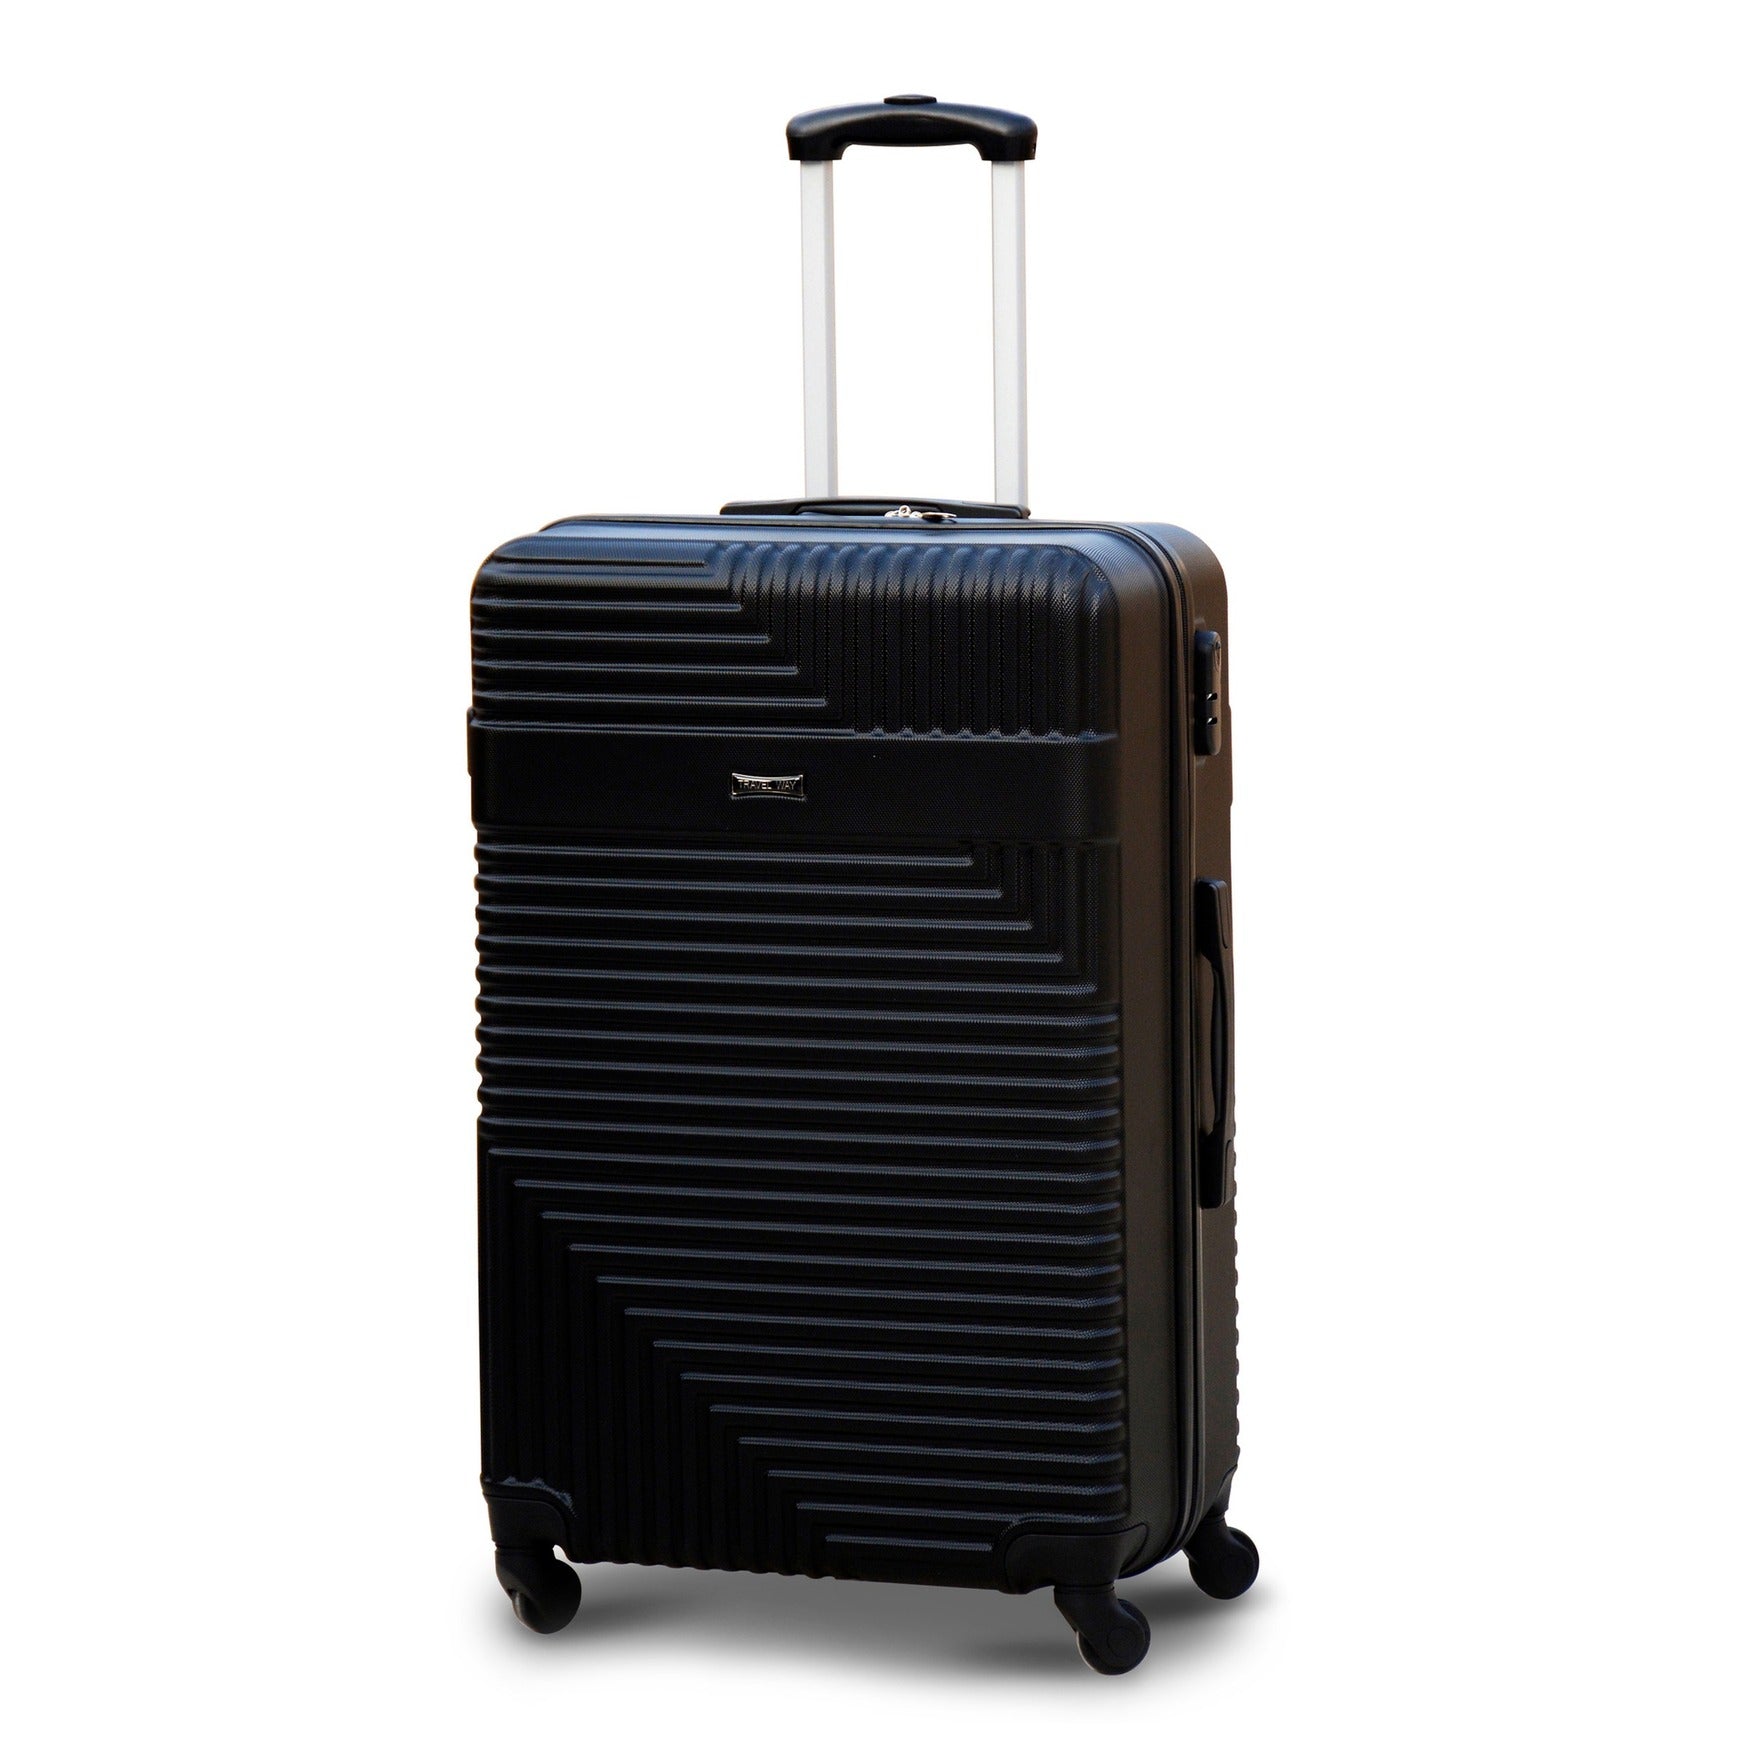 28" Black Colour Travel Way ABS Luggage Lightweight Hard Case Trolley Bag Zaappy.com